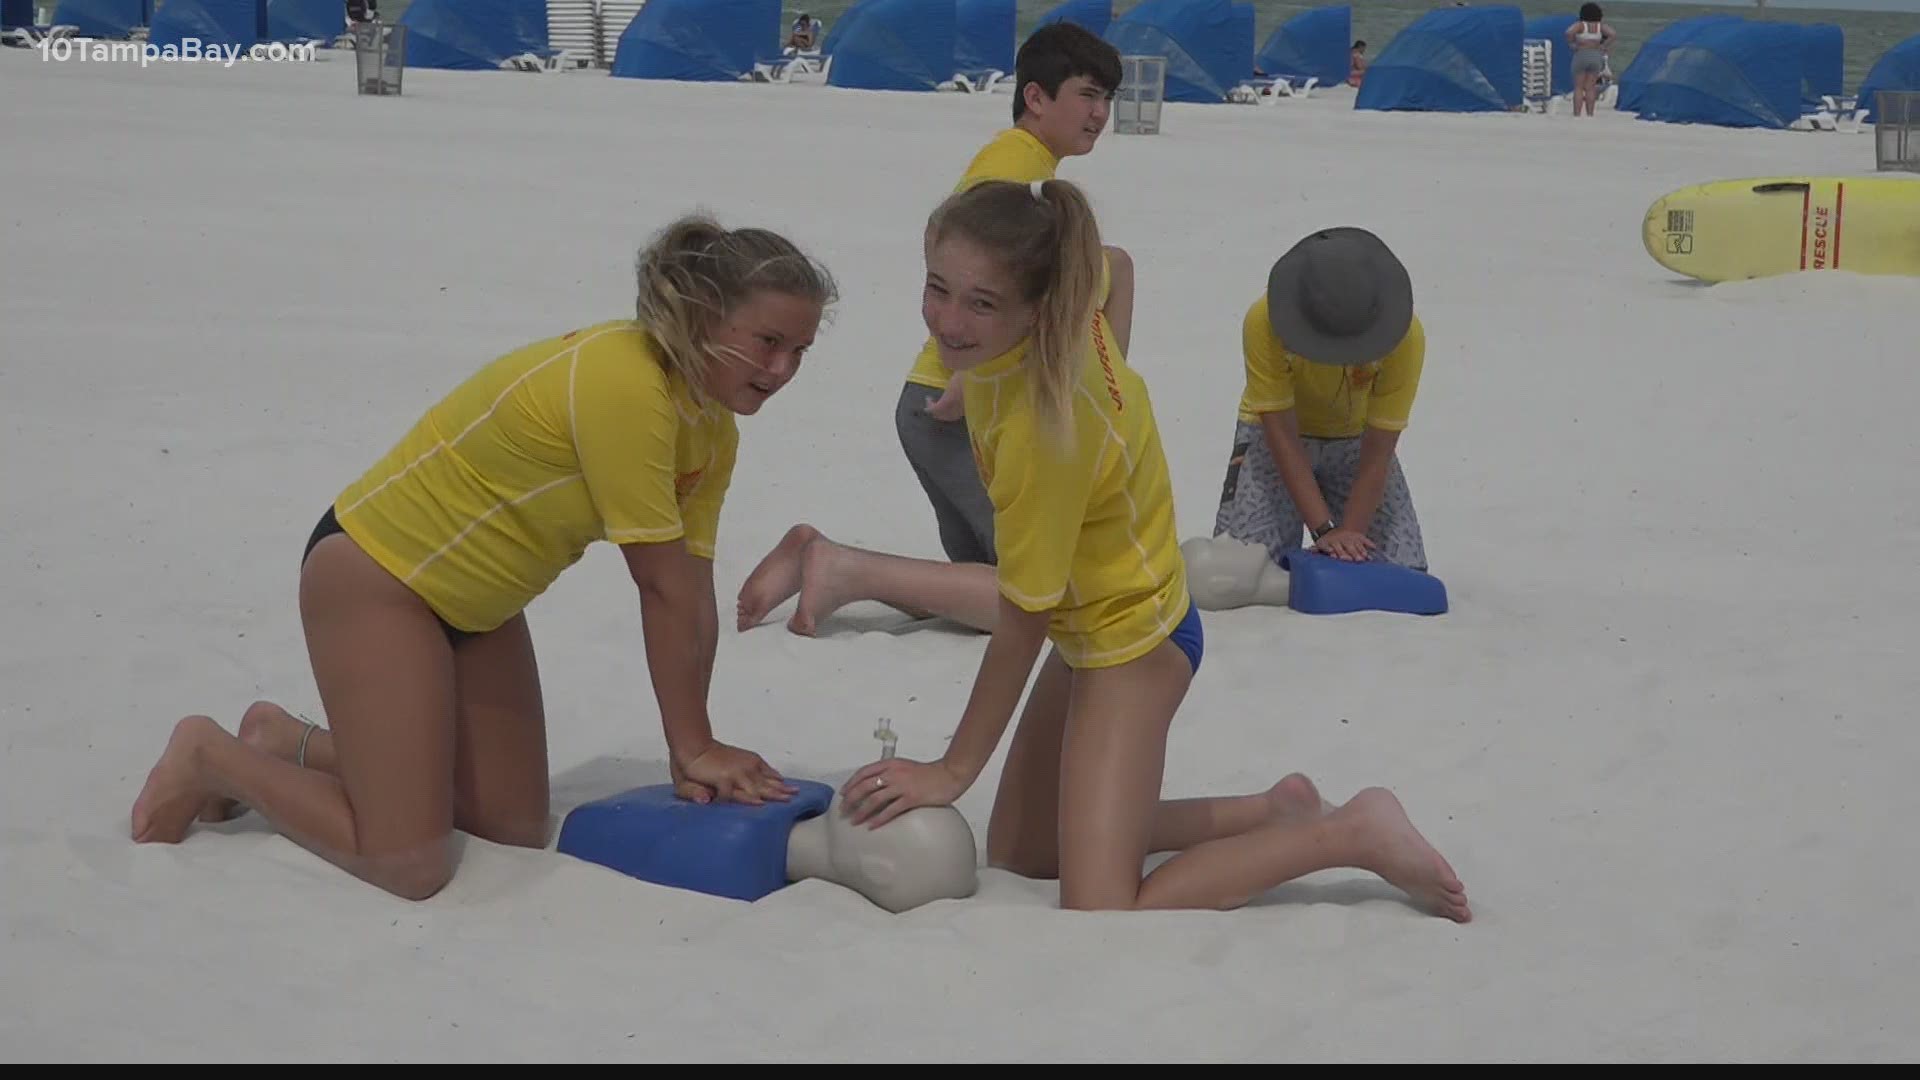 The Clearwater Fire & Rescue junior lifeguard camp teaches kids what it takes to look after swimmers at the beach.